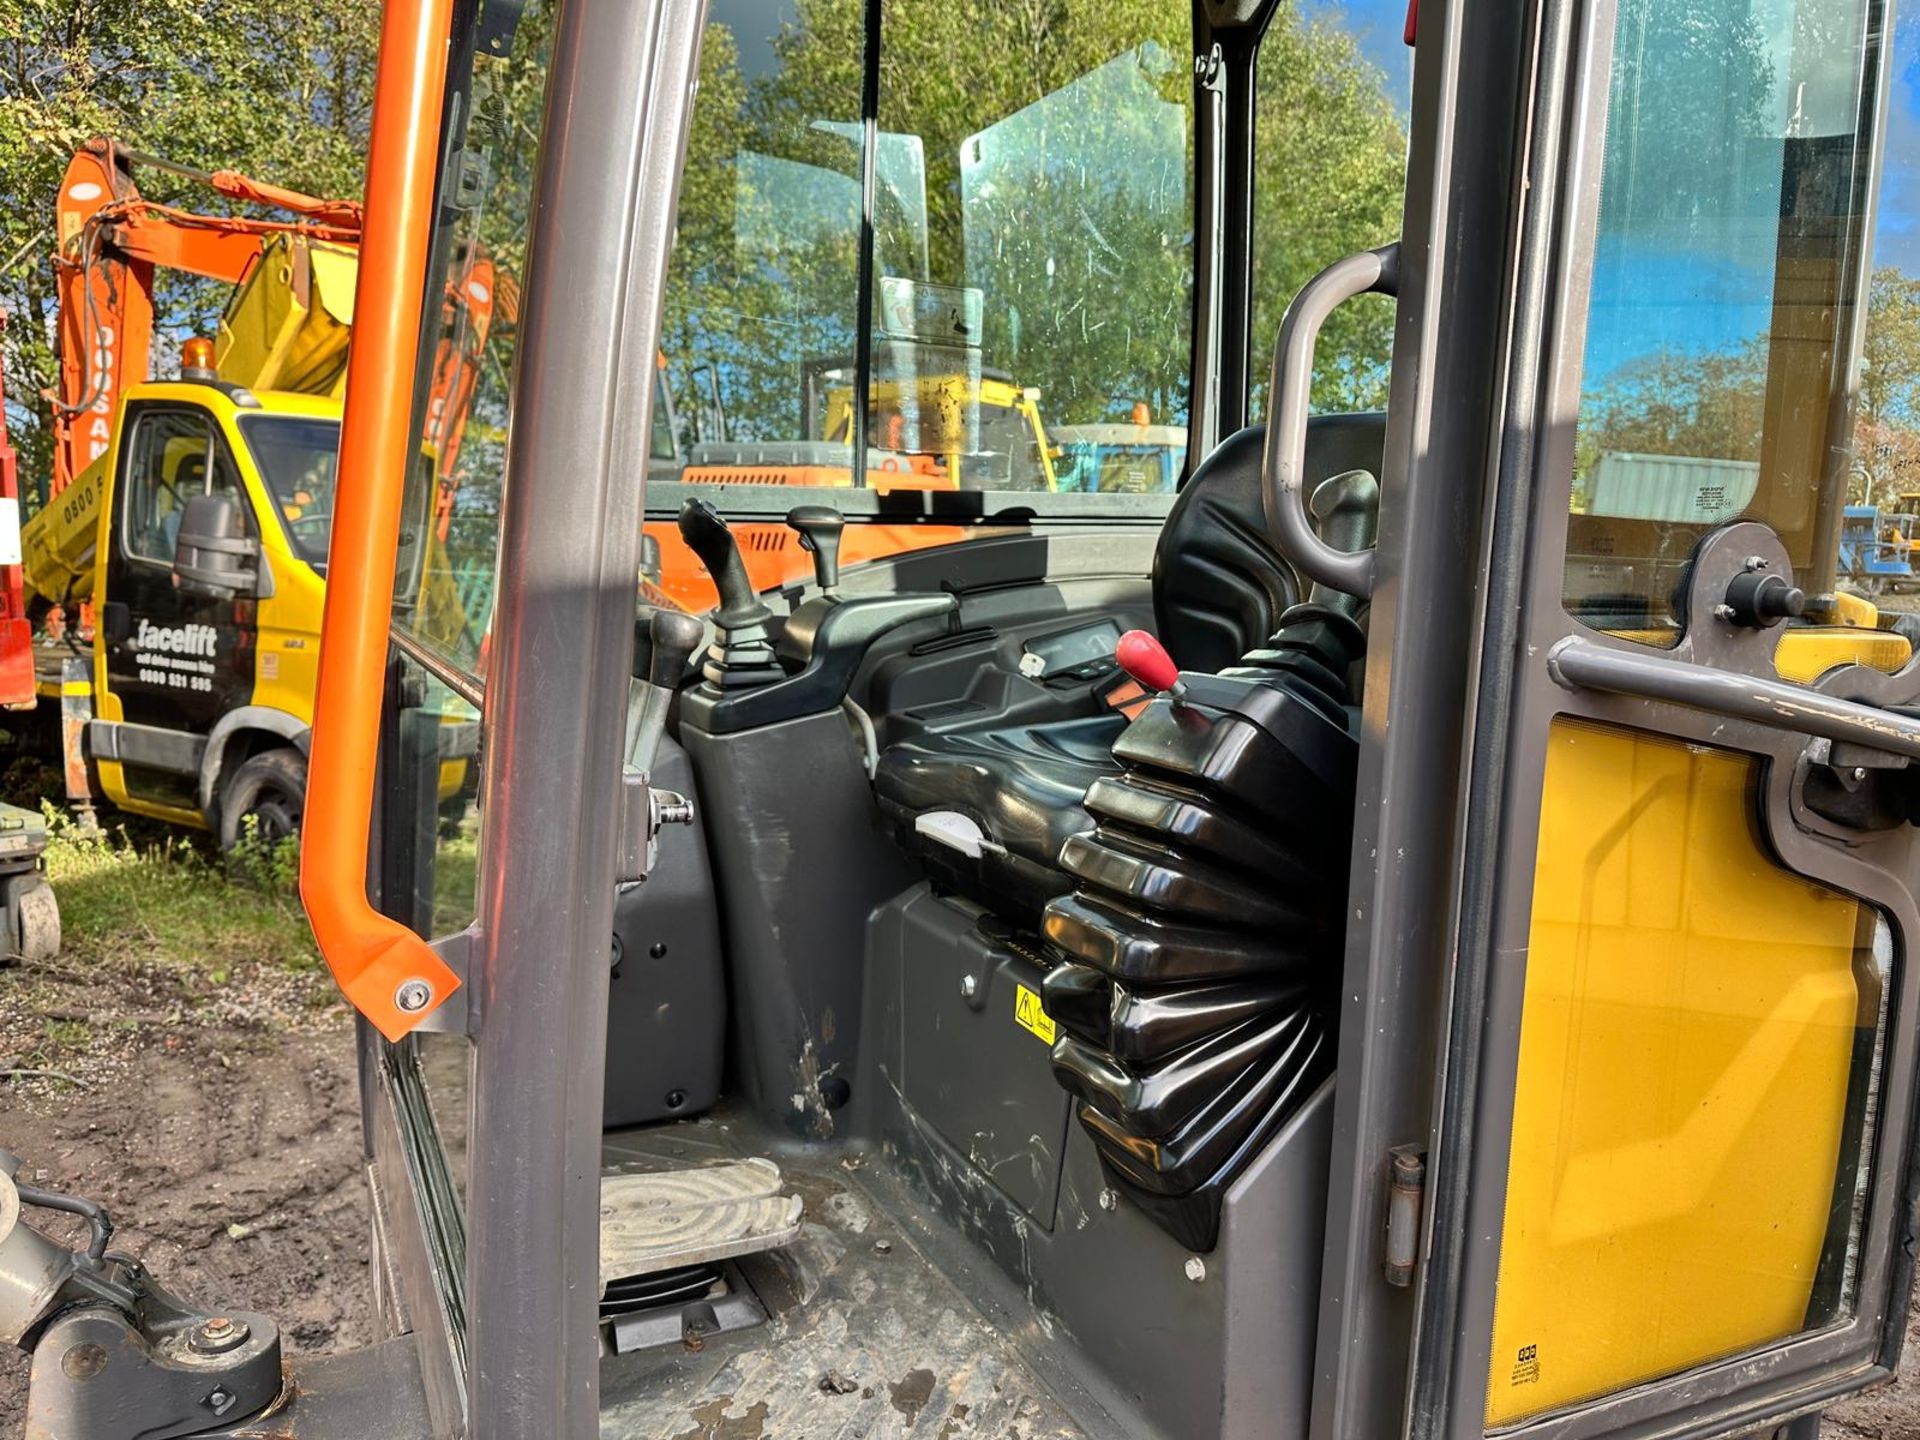 2018 VOLVO EC18E MINI EXCAVATOR - RUNS DRIVES AND WORKS WELL - SHOWING A LOW 1801 HOURS! - Bild 8 aus 21